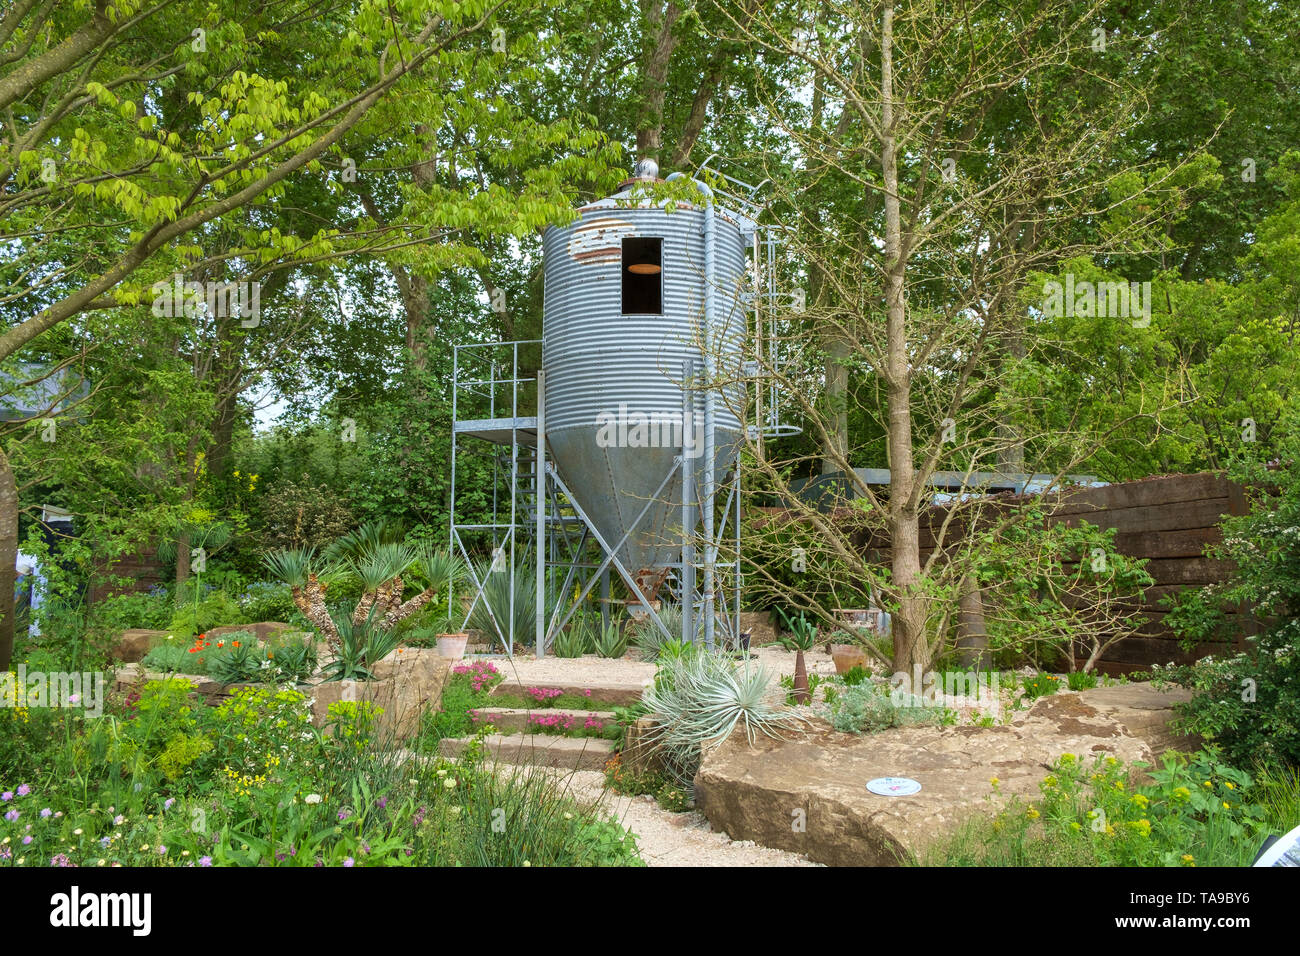 London, UK - May 22nd 2019: RHS Chelsea Flower Show, the Resilient Garden, celebrating a century of forestry. Stock Photo